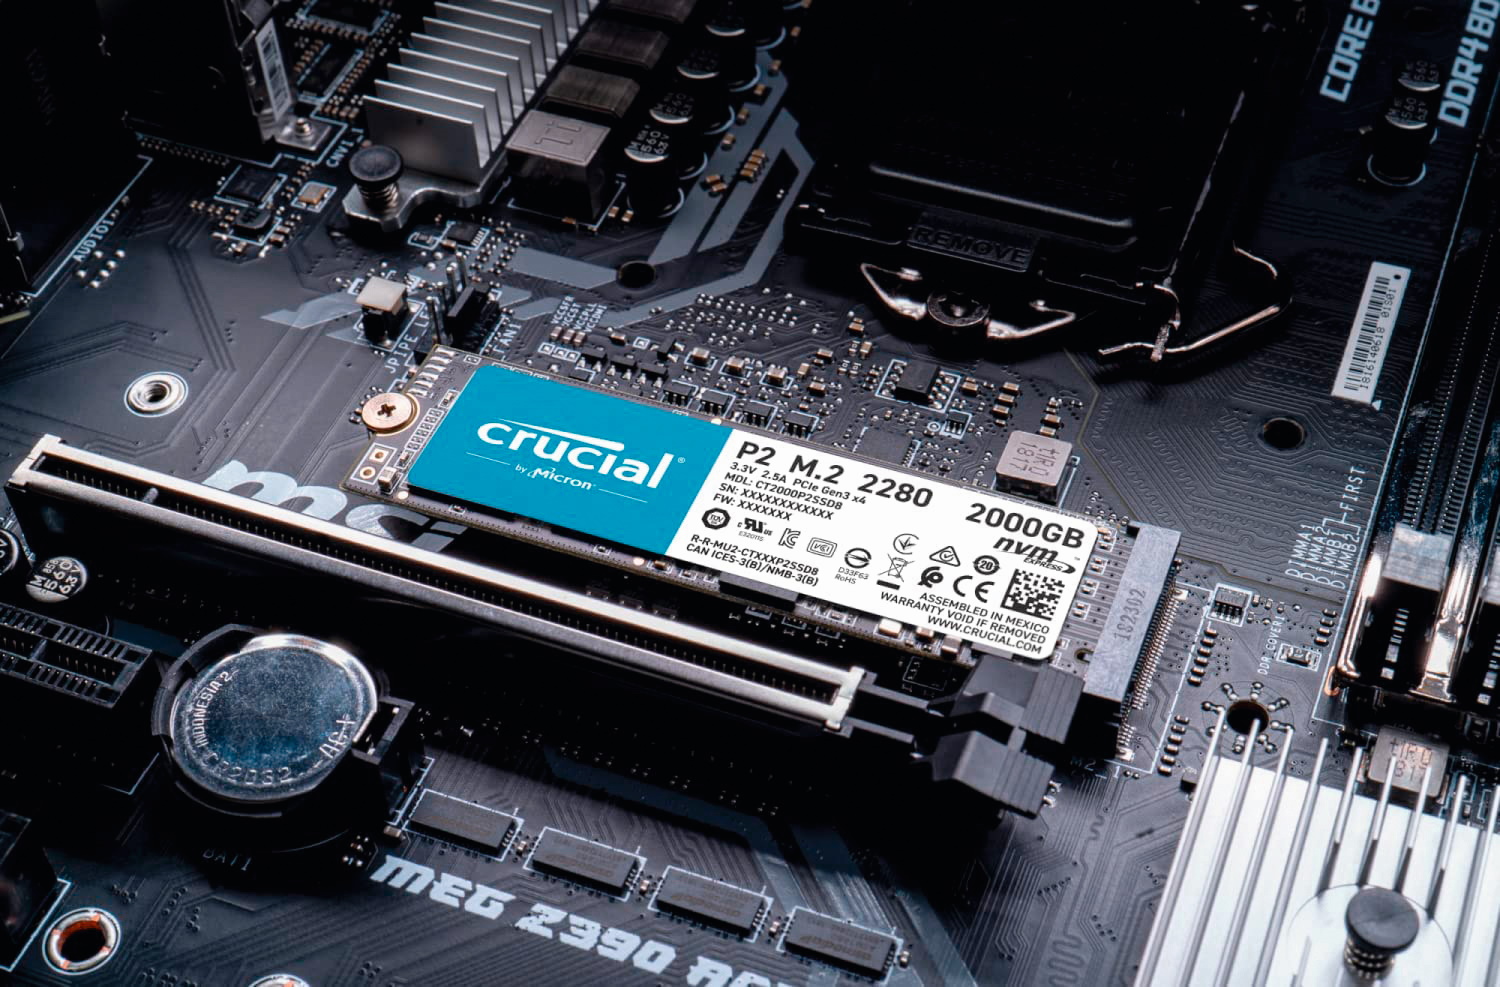 SSD crucial